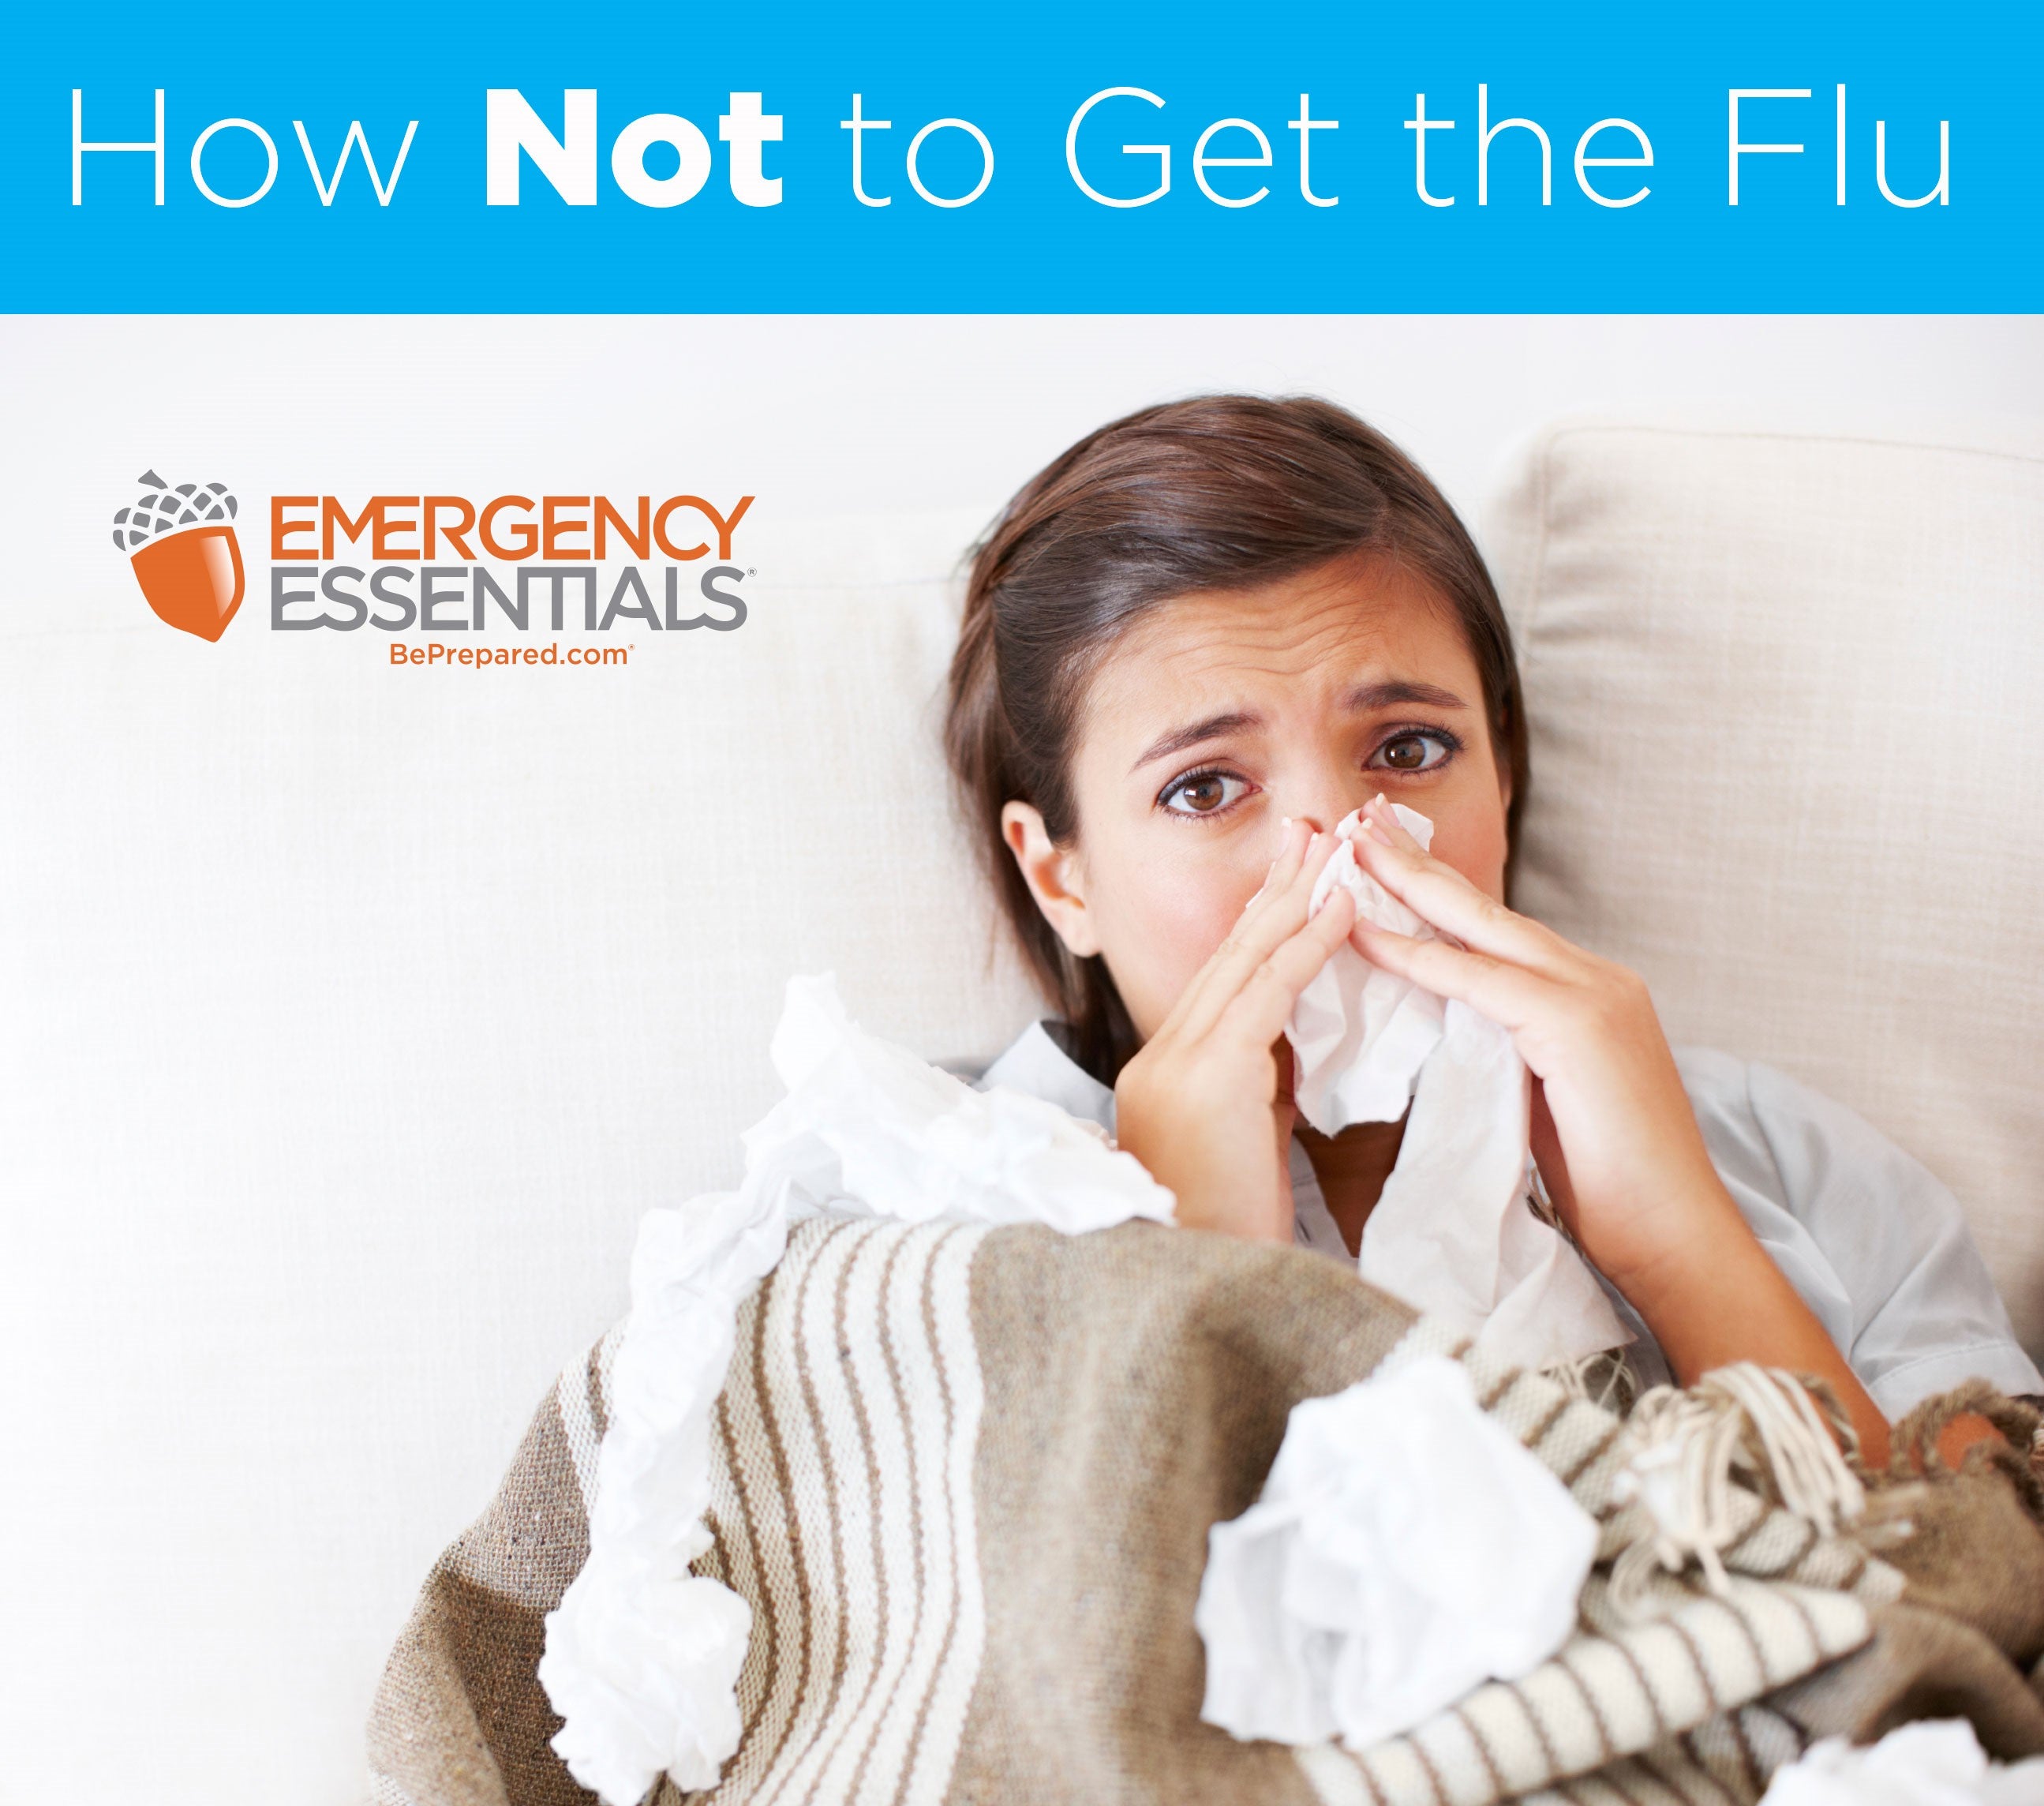 How NOT to Get the Flu